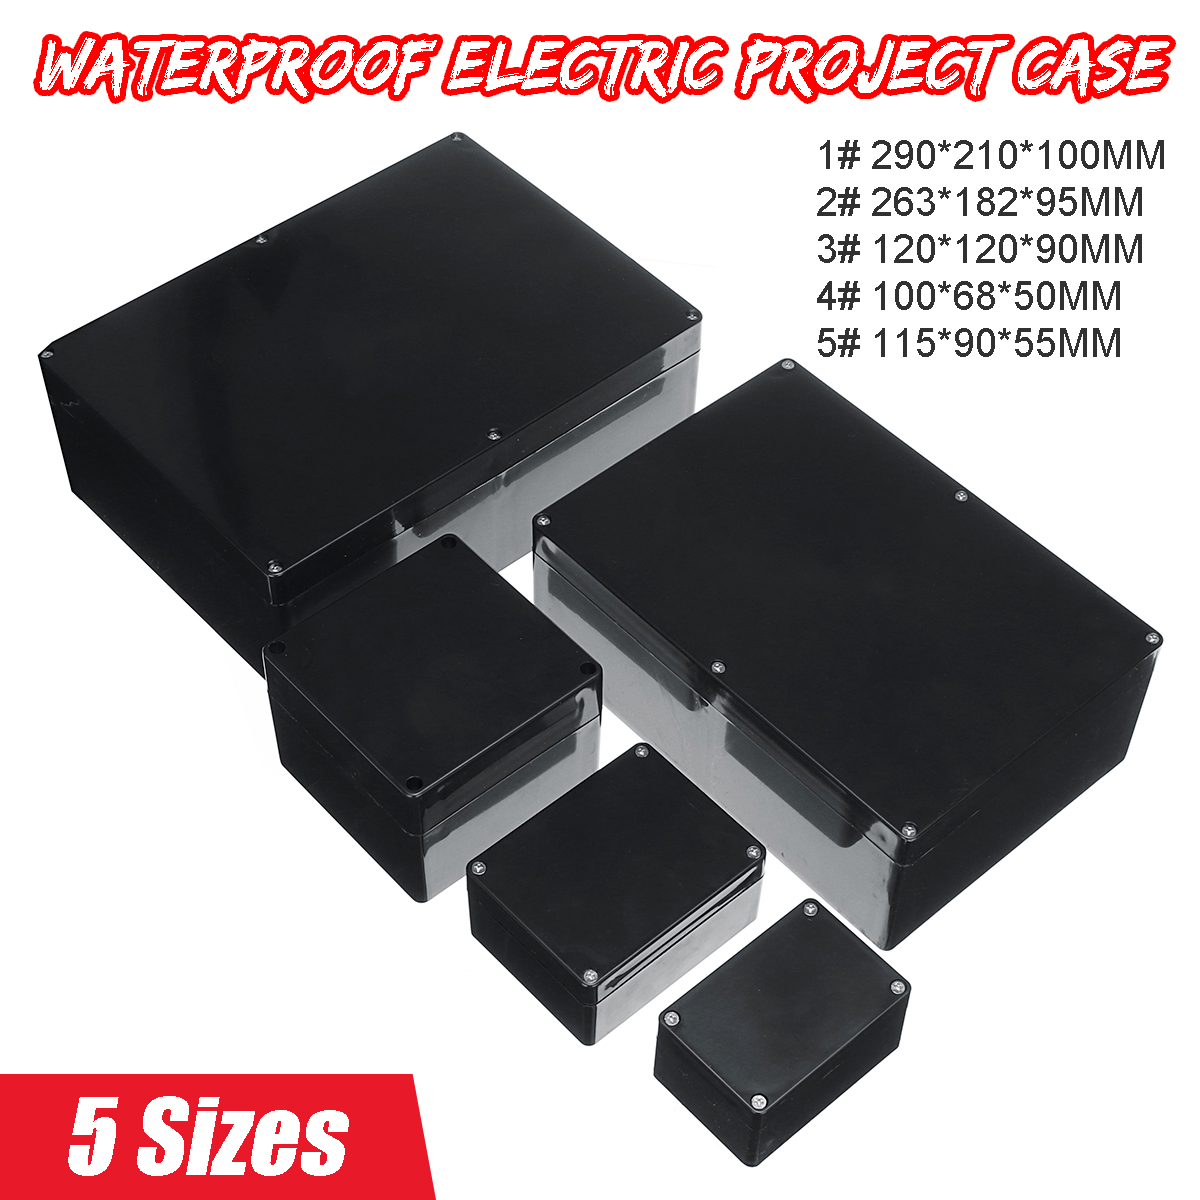 Enclosure-Box-Electronic-Waterproof-Plastic-Electrical-Project-Junction-Case-1692472-3